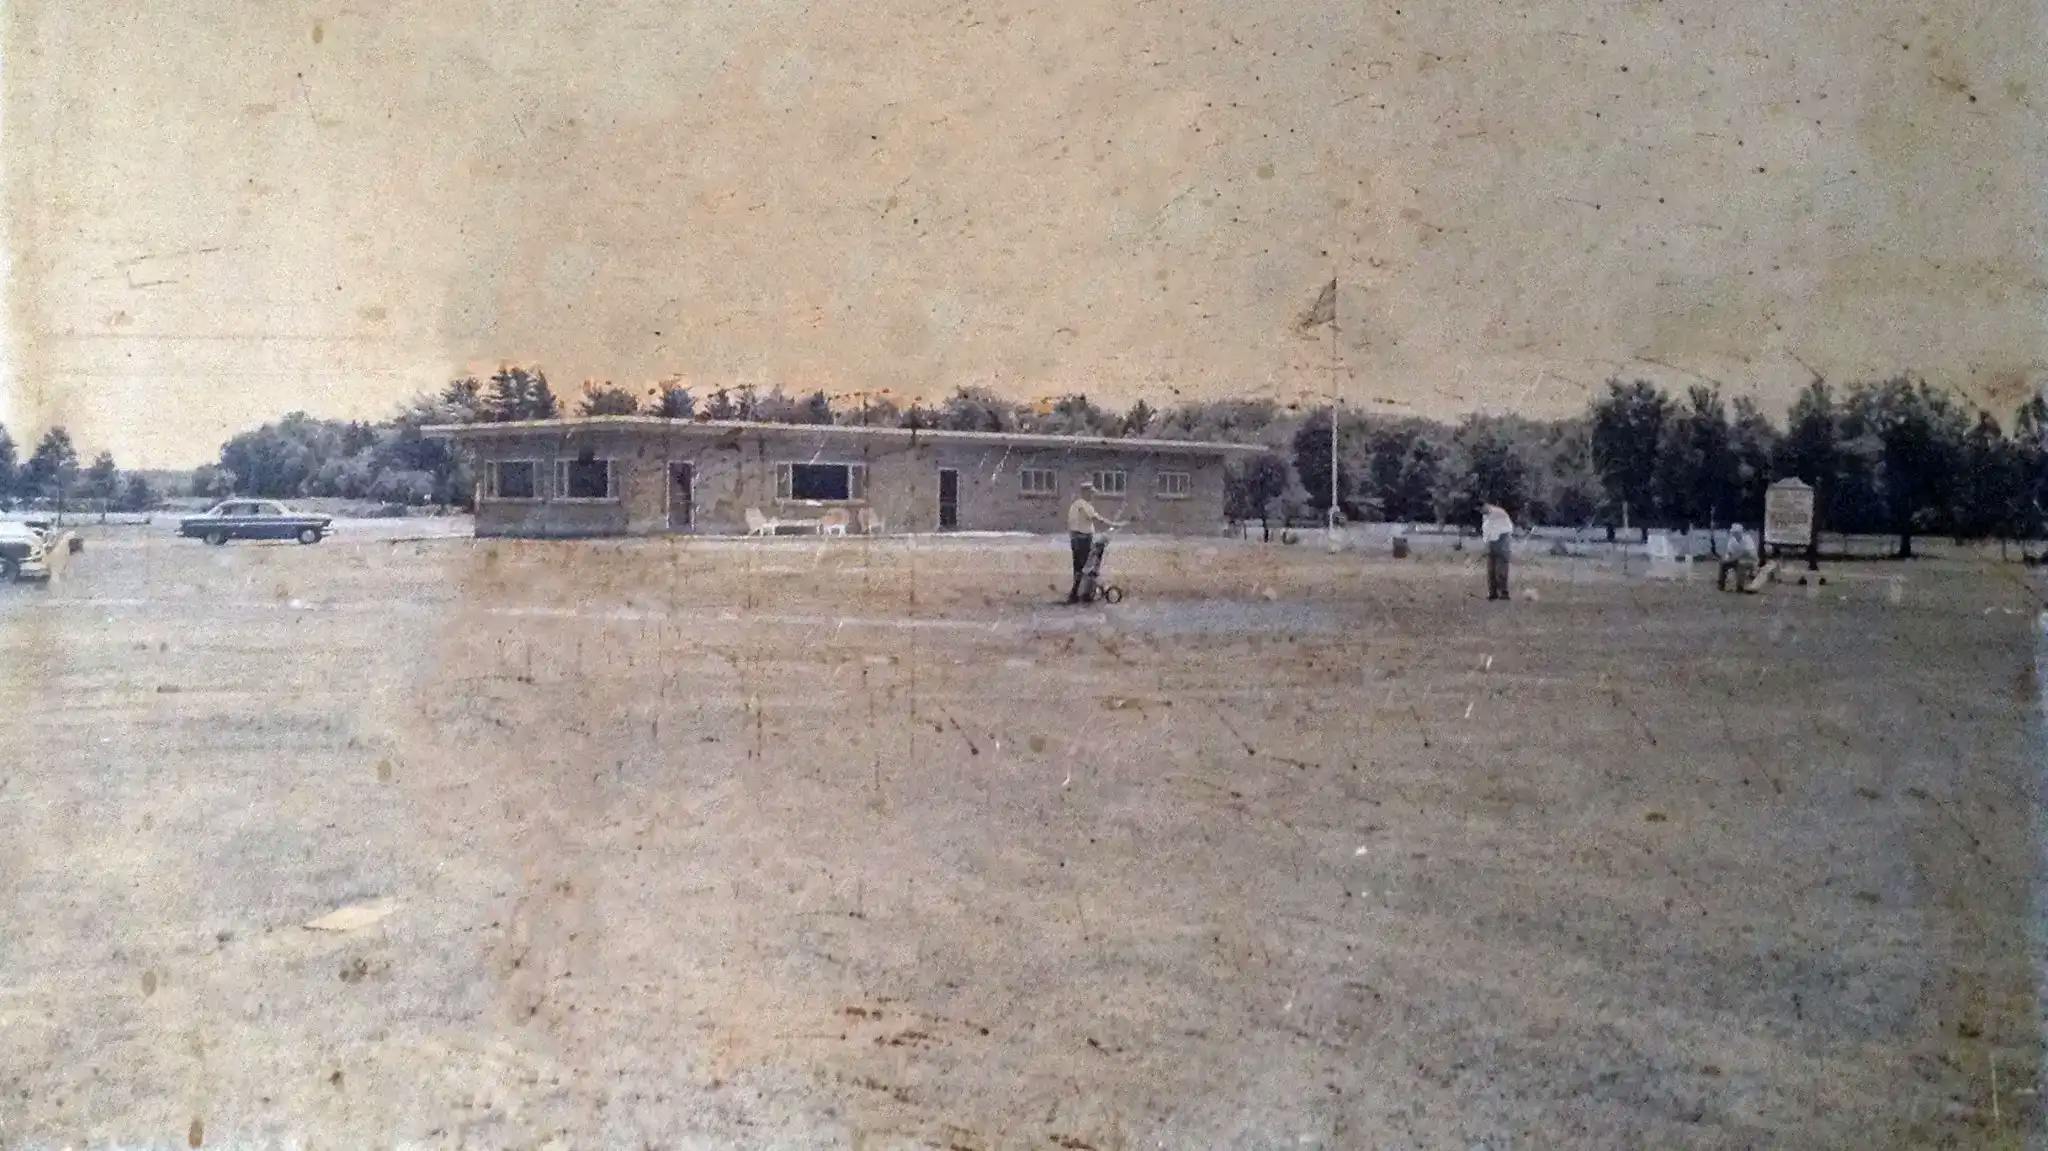 An image of the clubhouse in 1954